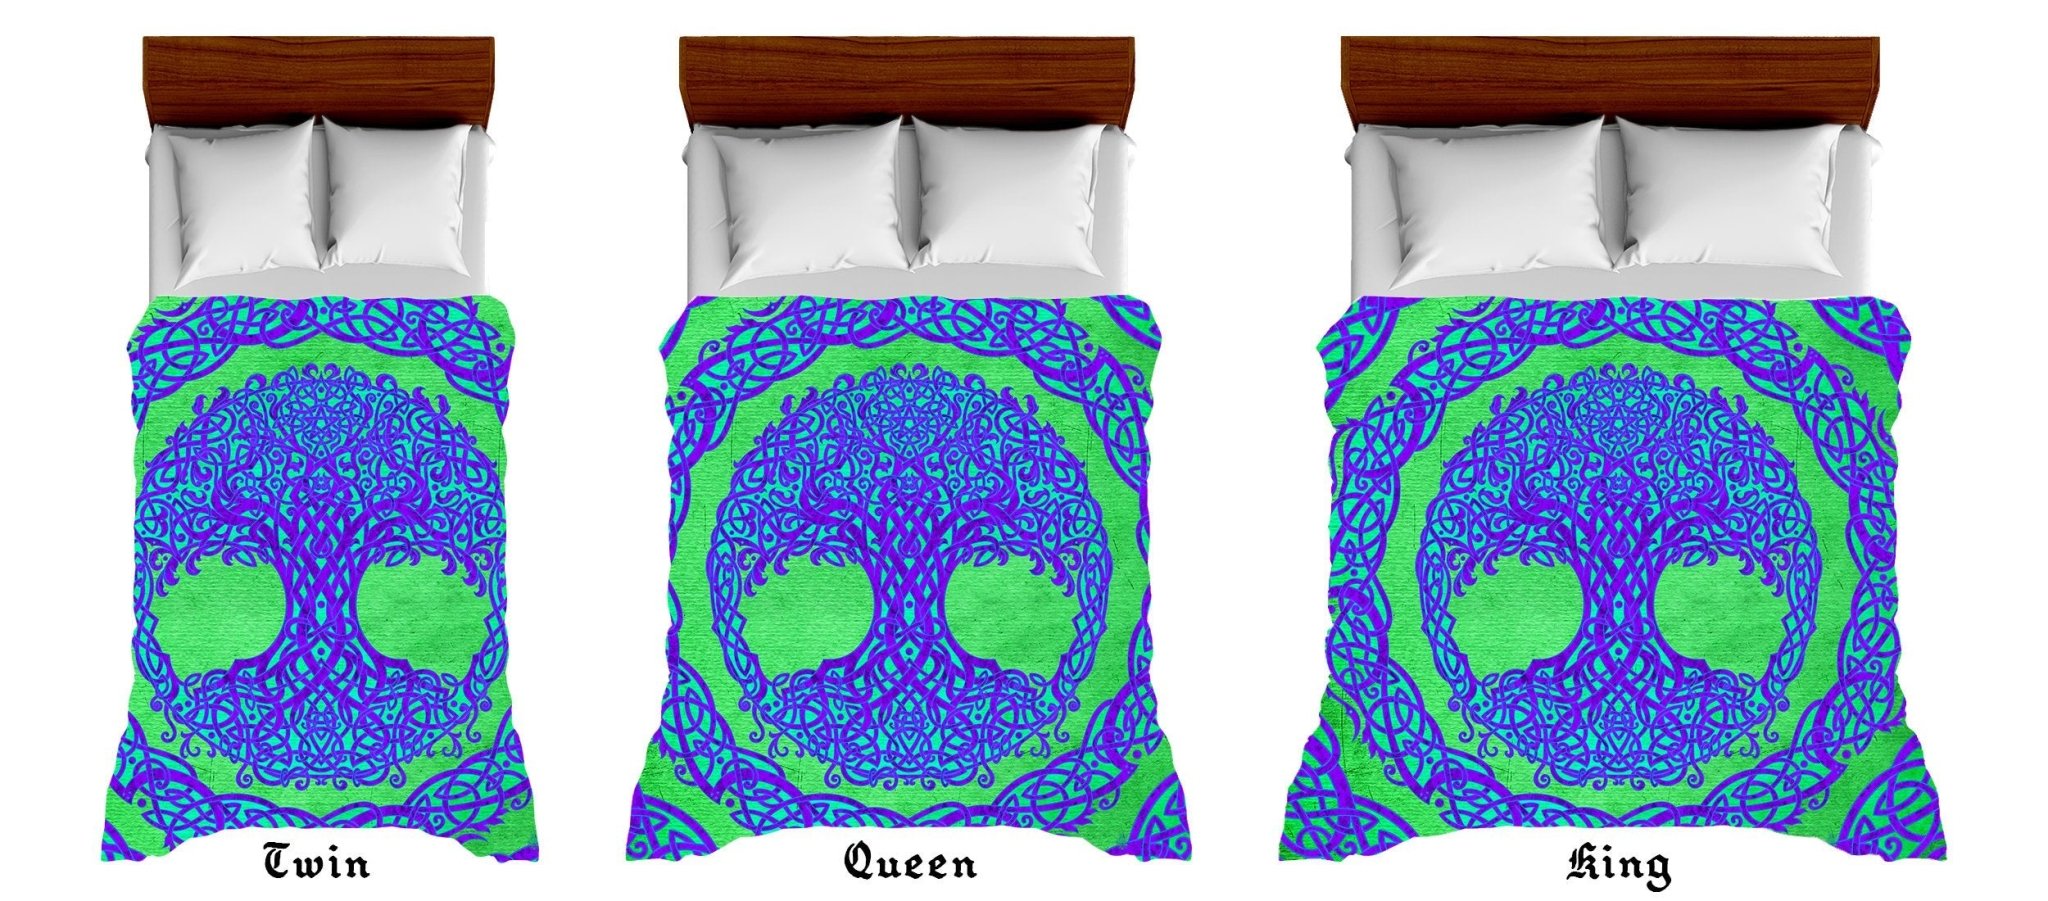 Tree of Life Bedding Set, Comforter and Duvet, Indie Bed Cover, Wiccan Bedroom Decor King, Queen and Twin Size - Celtic, Psy, Green and Purple - Abysm Internal